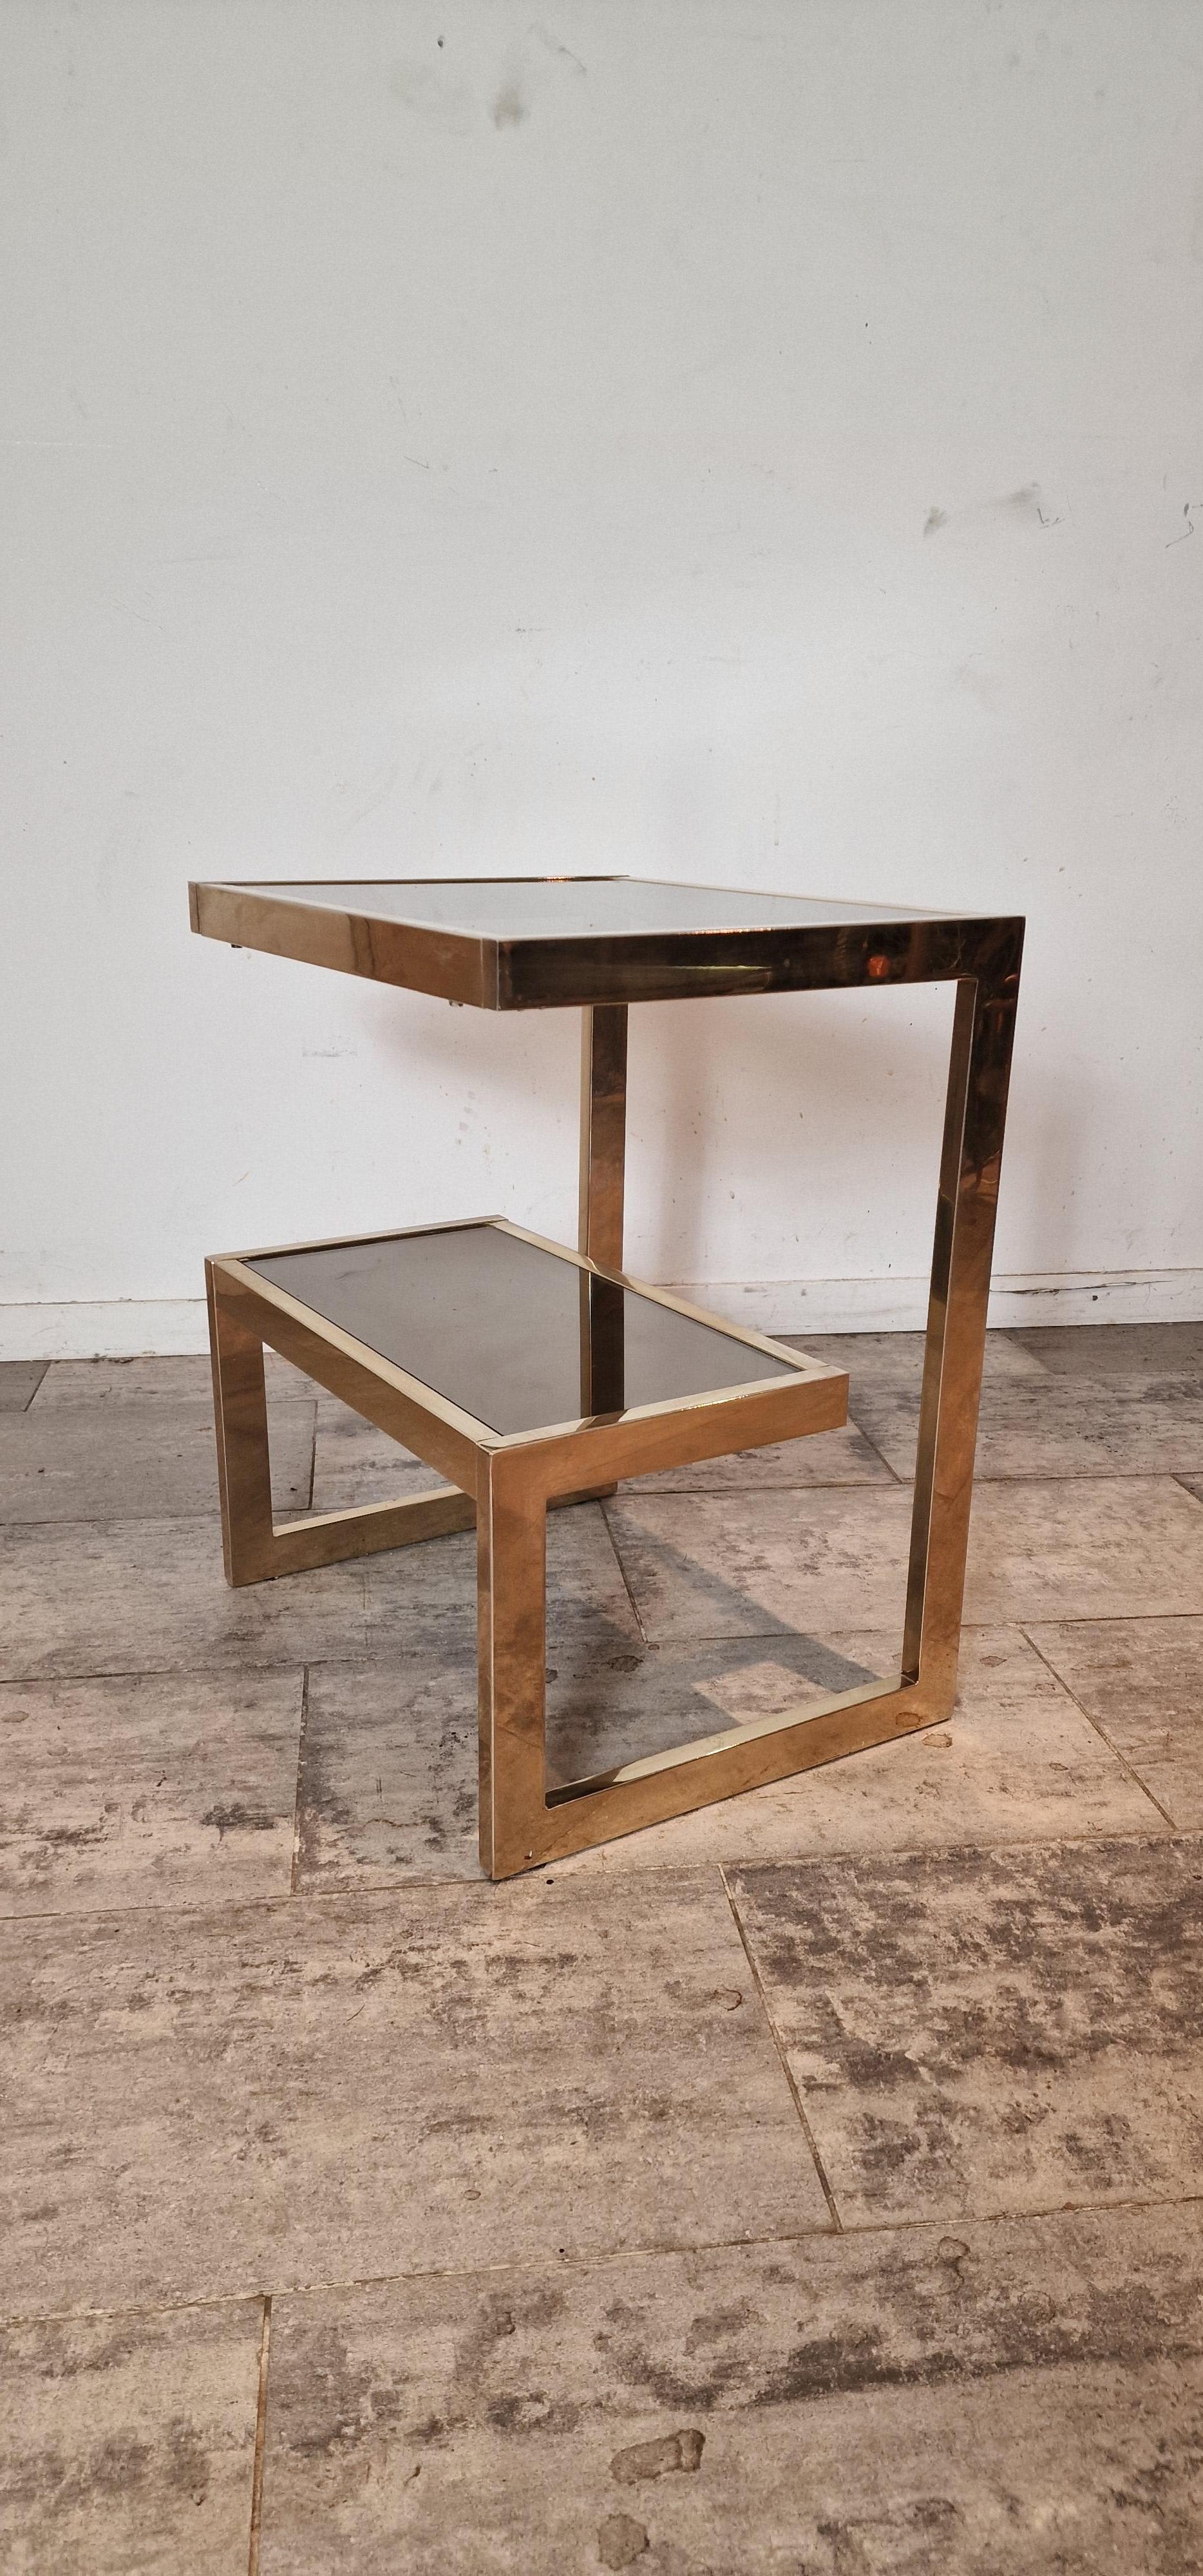 Gold plated belgochrom side table from Belgium 1970s.